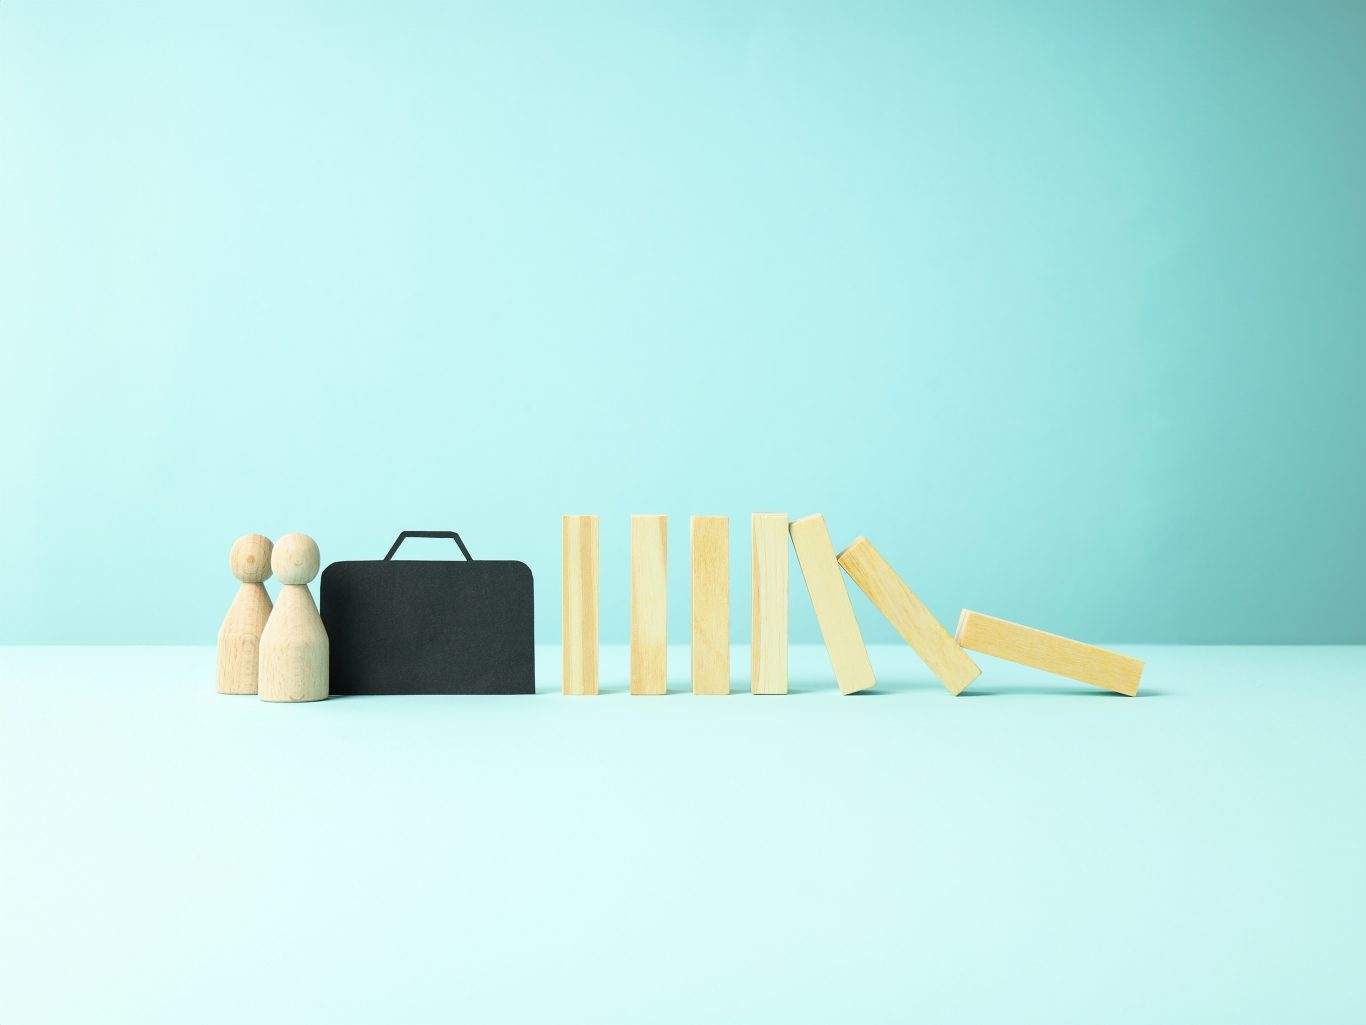 Two wooden people with a briefcase with some wooden blocks tumbling over.